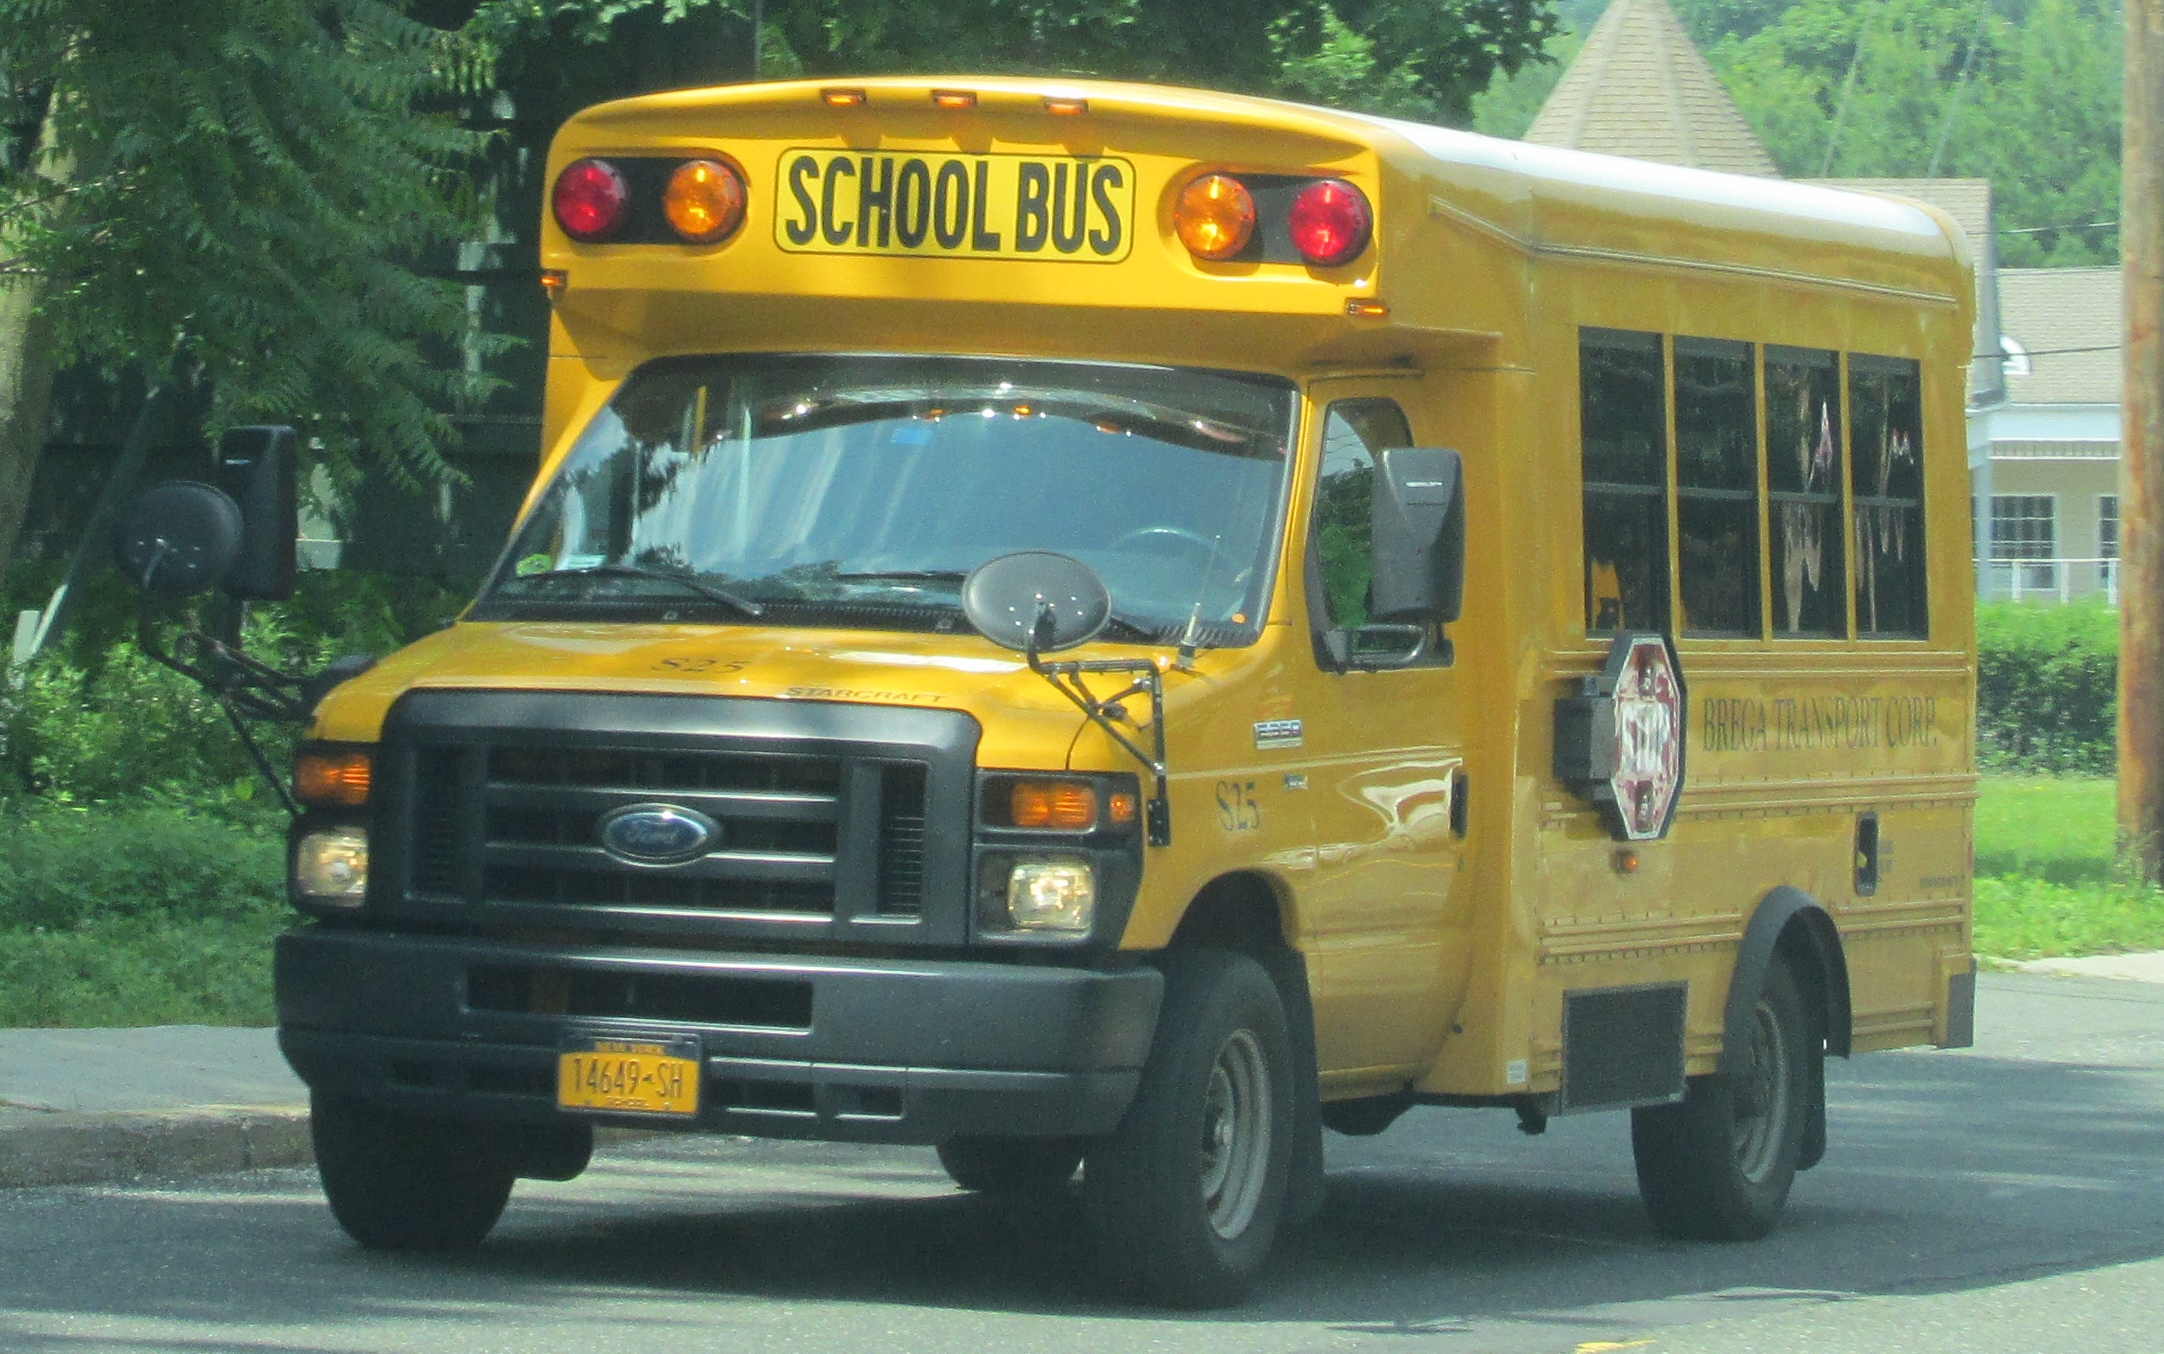 a school bus is parked in the street